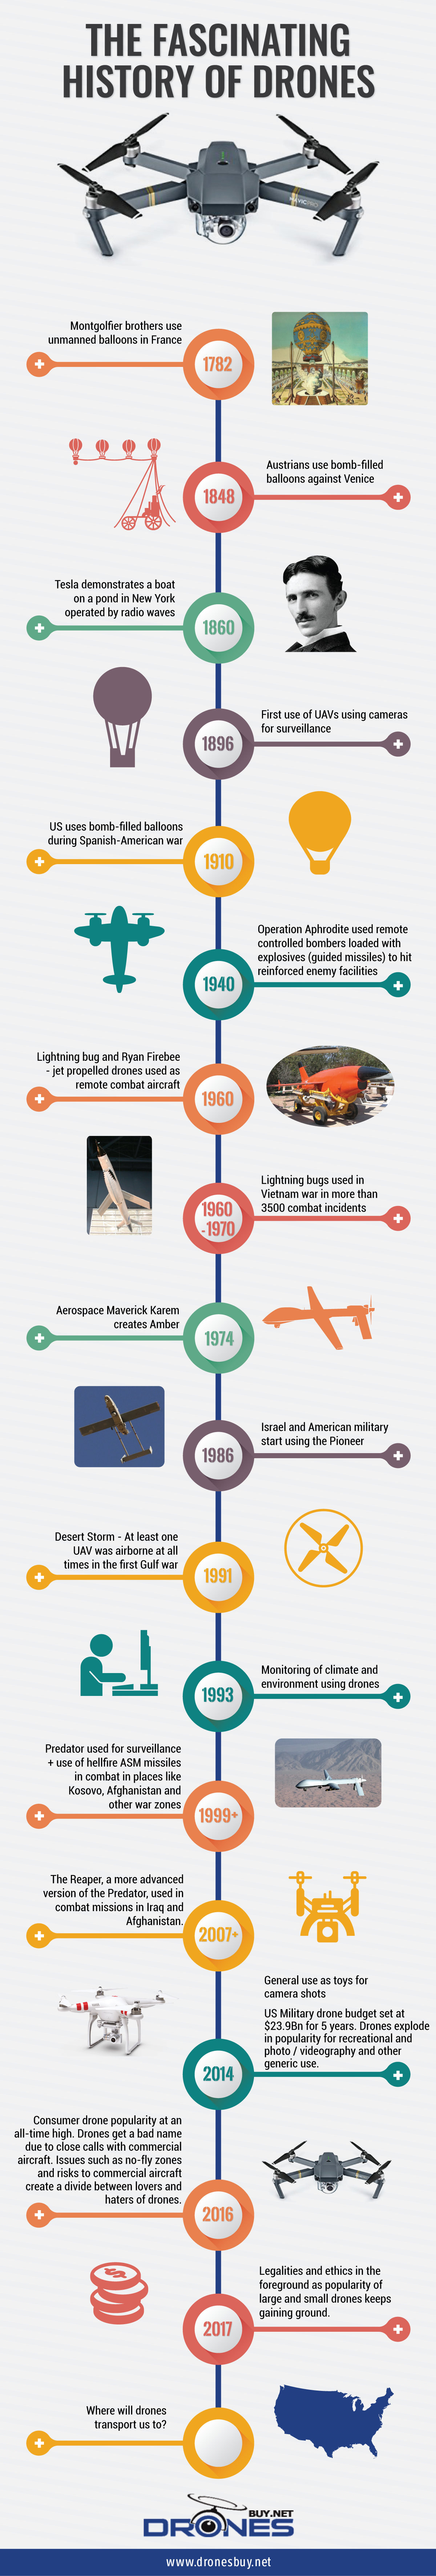 Timeline of the History of drones - Infographic